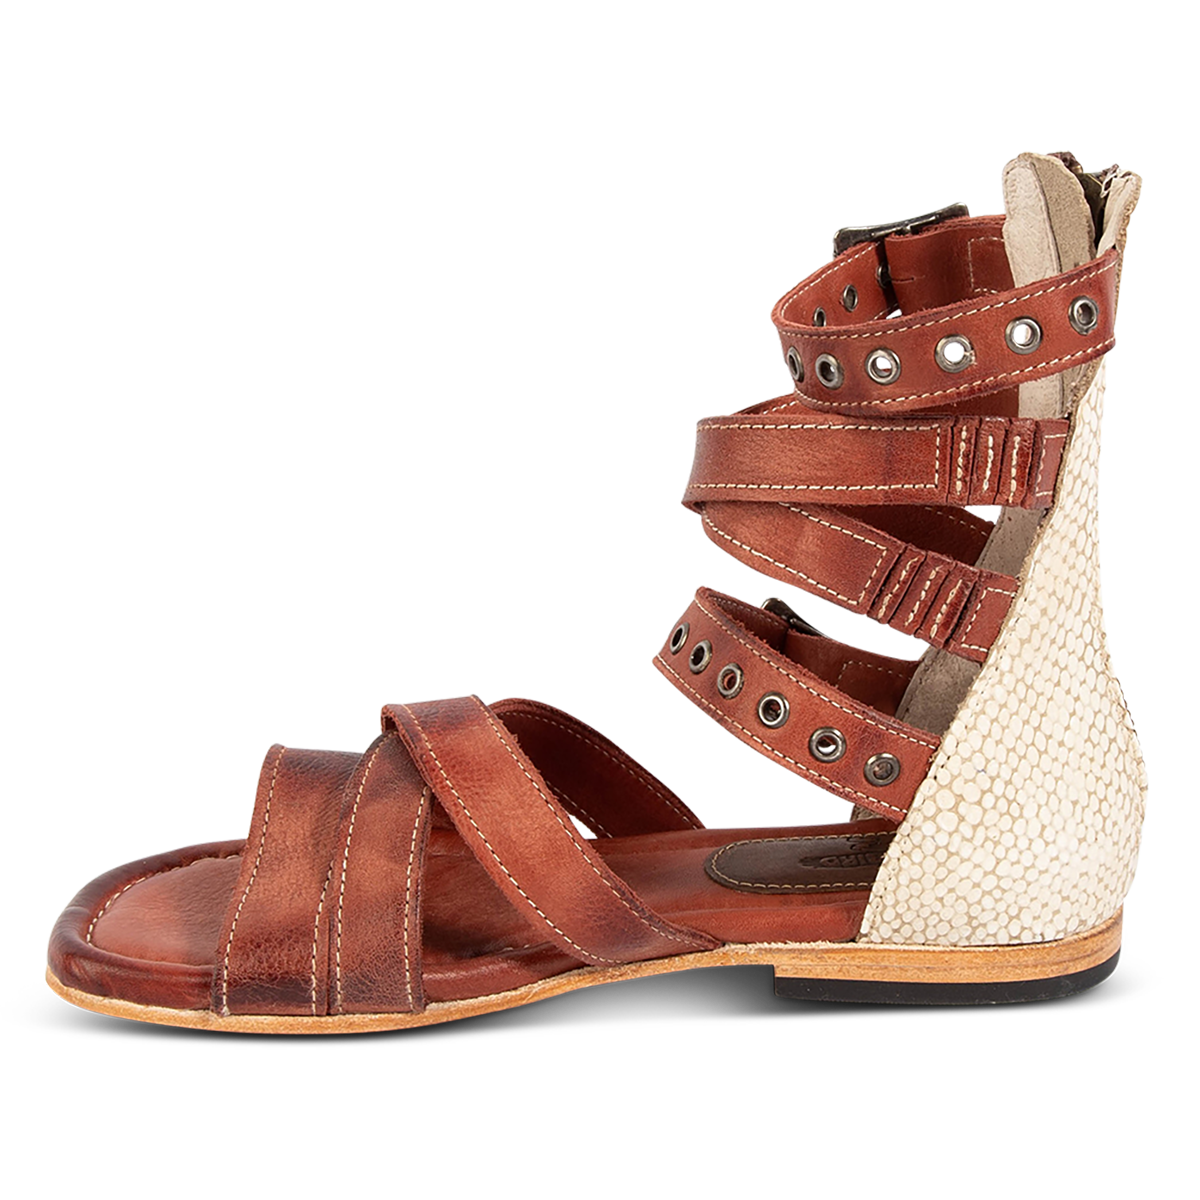 Inside view showing FREEBIRD women's Sydney rust multi leather gladiator sandal with adjustable leather straps and a contrasting back panel